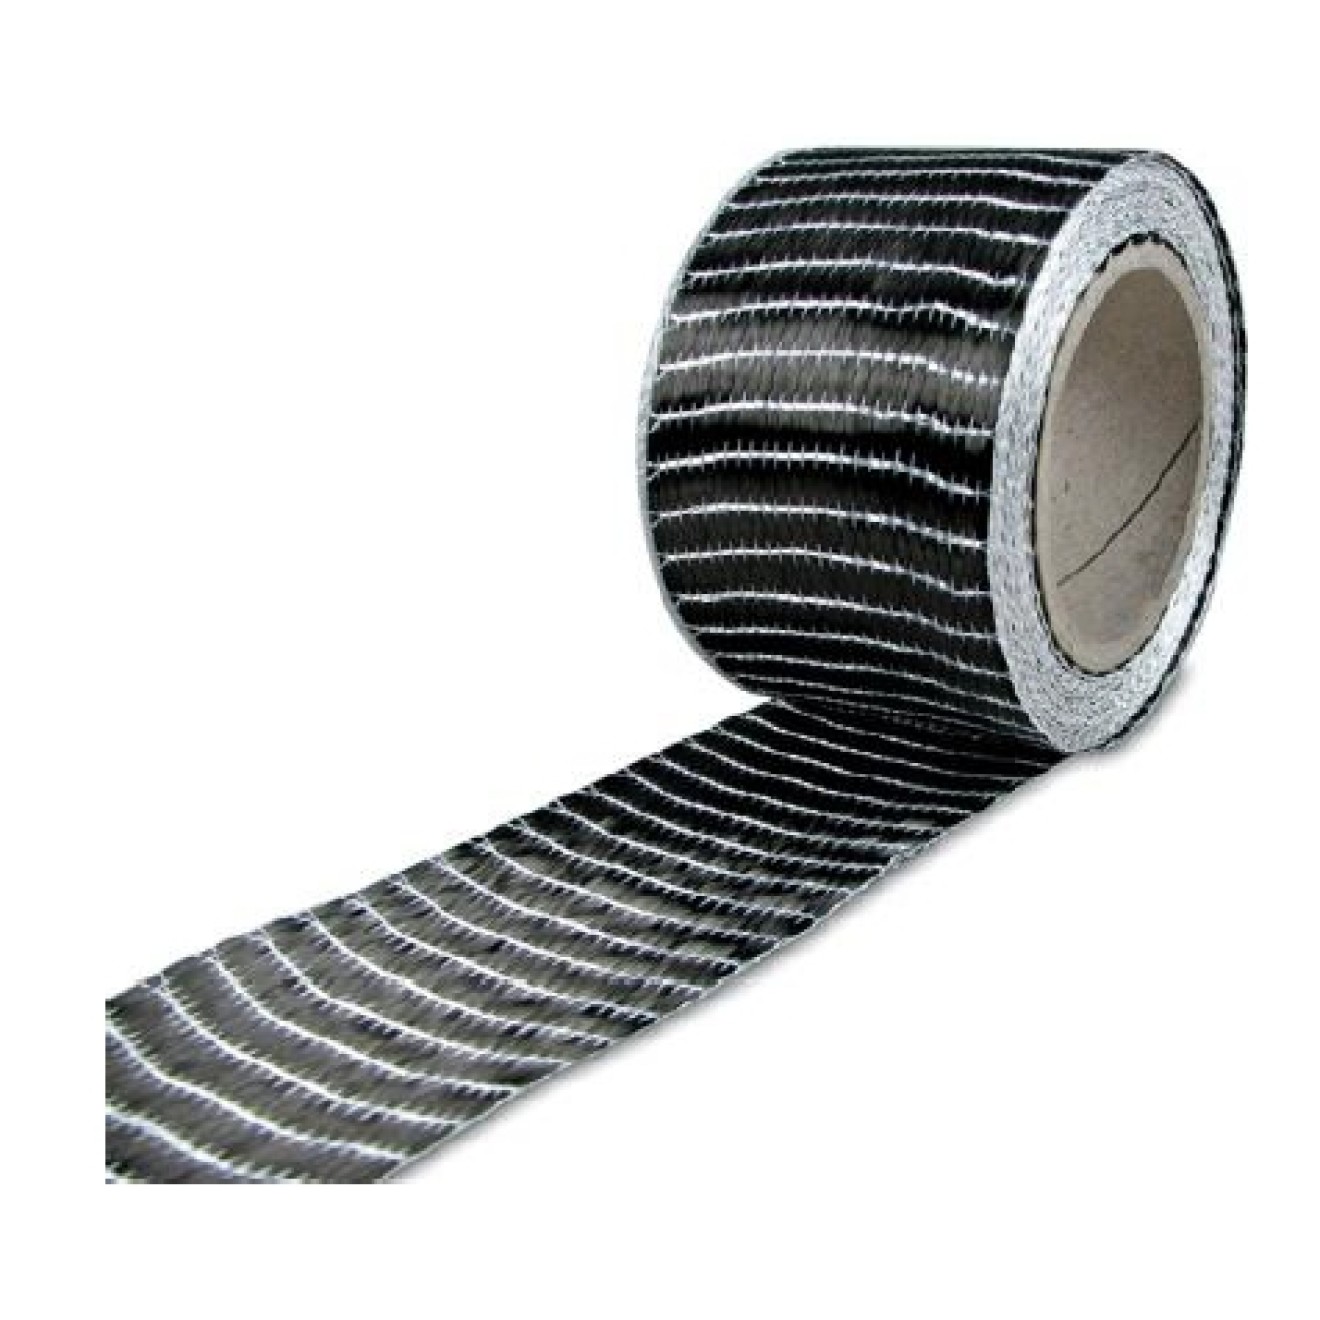 Woven Carbon-UD 250g/m² width 100mm unidirectional